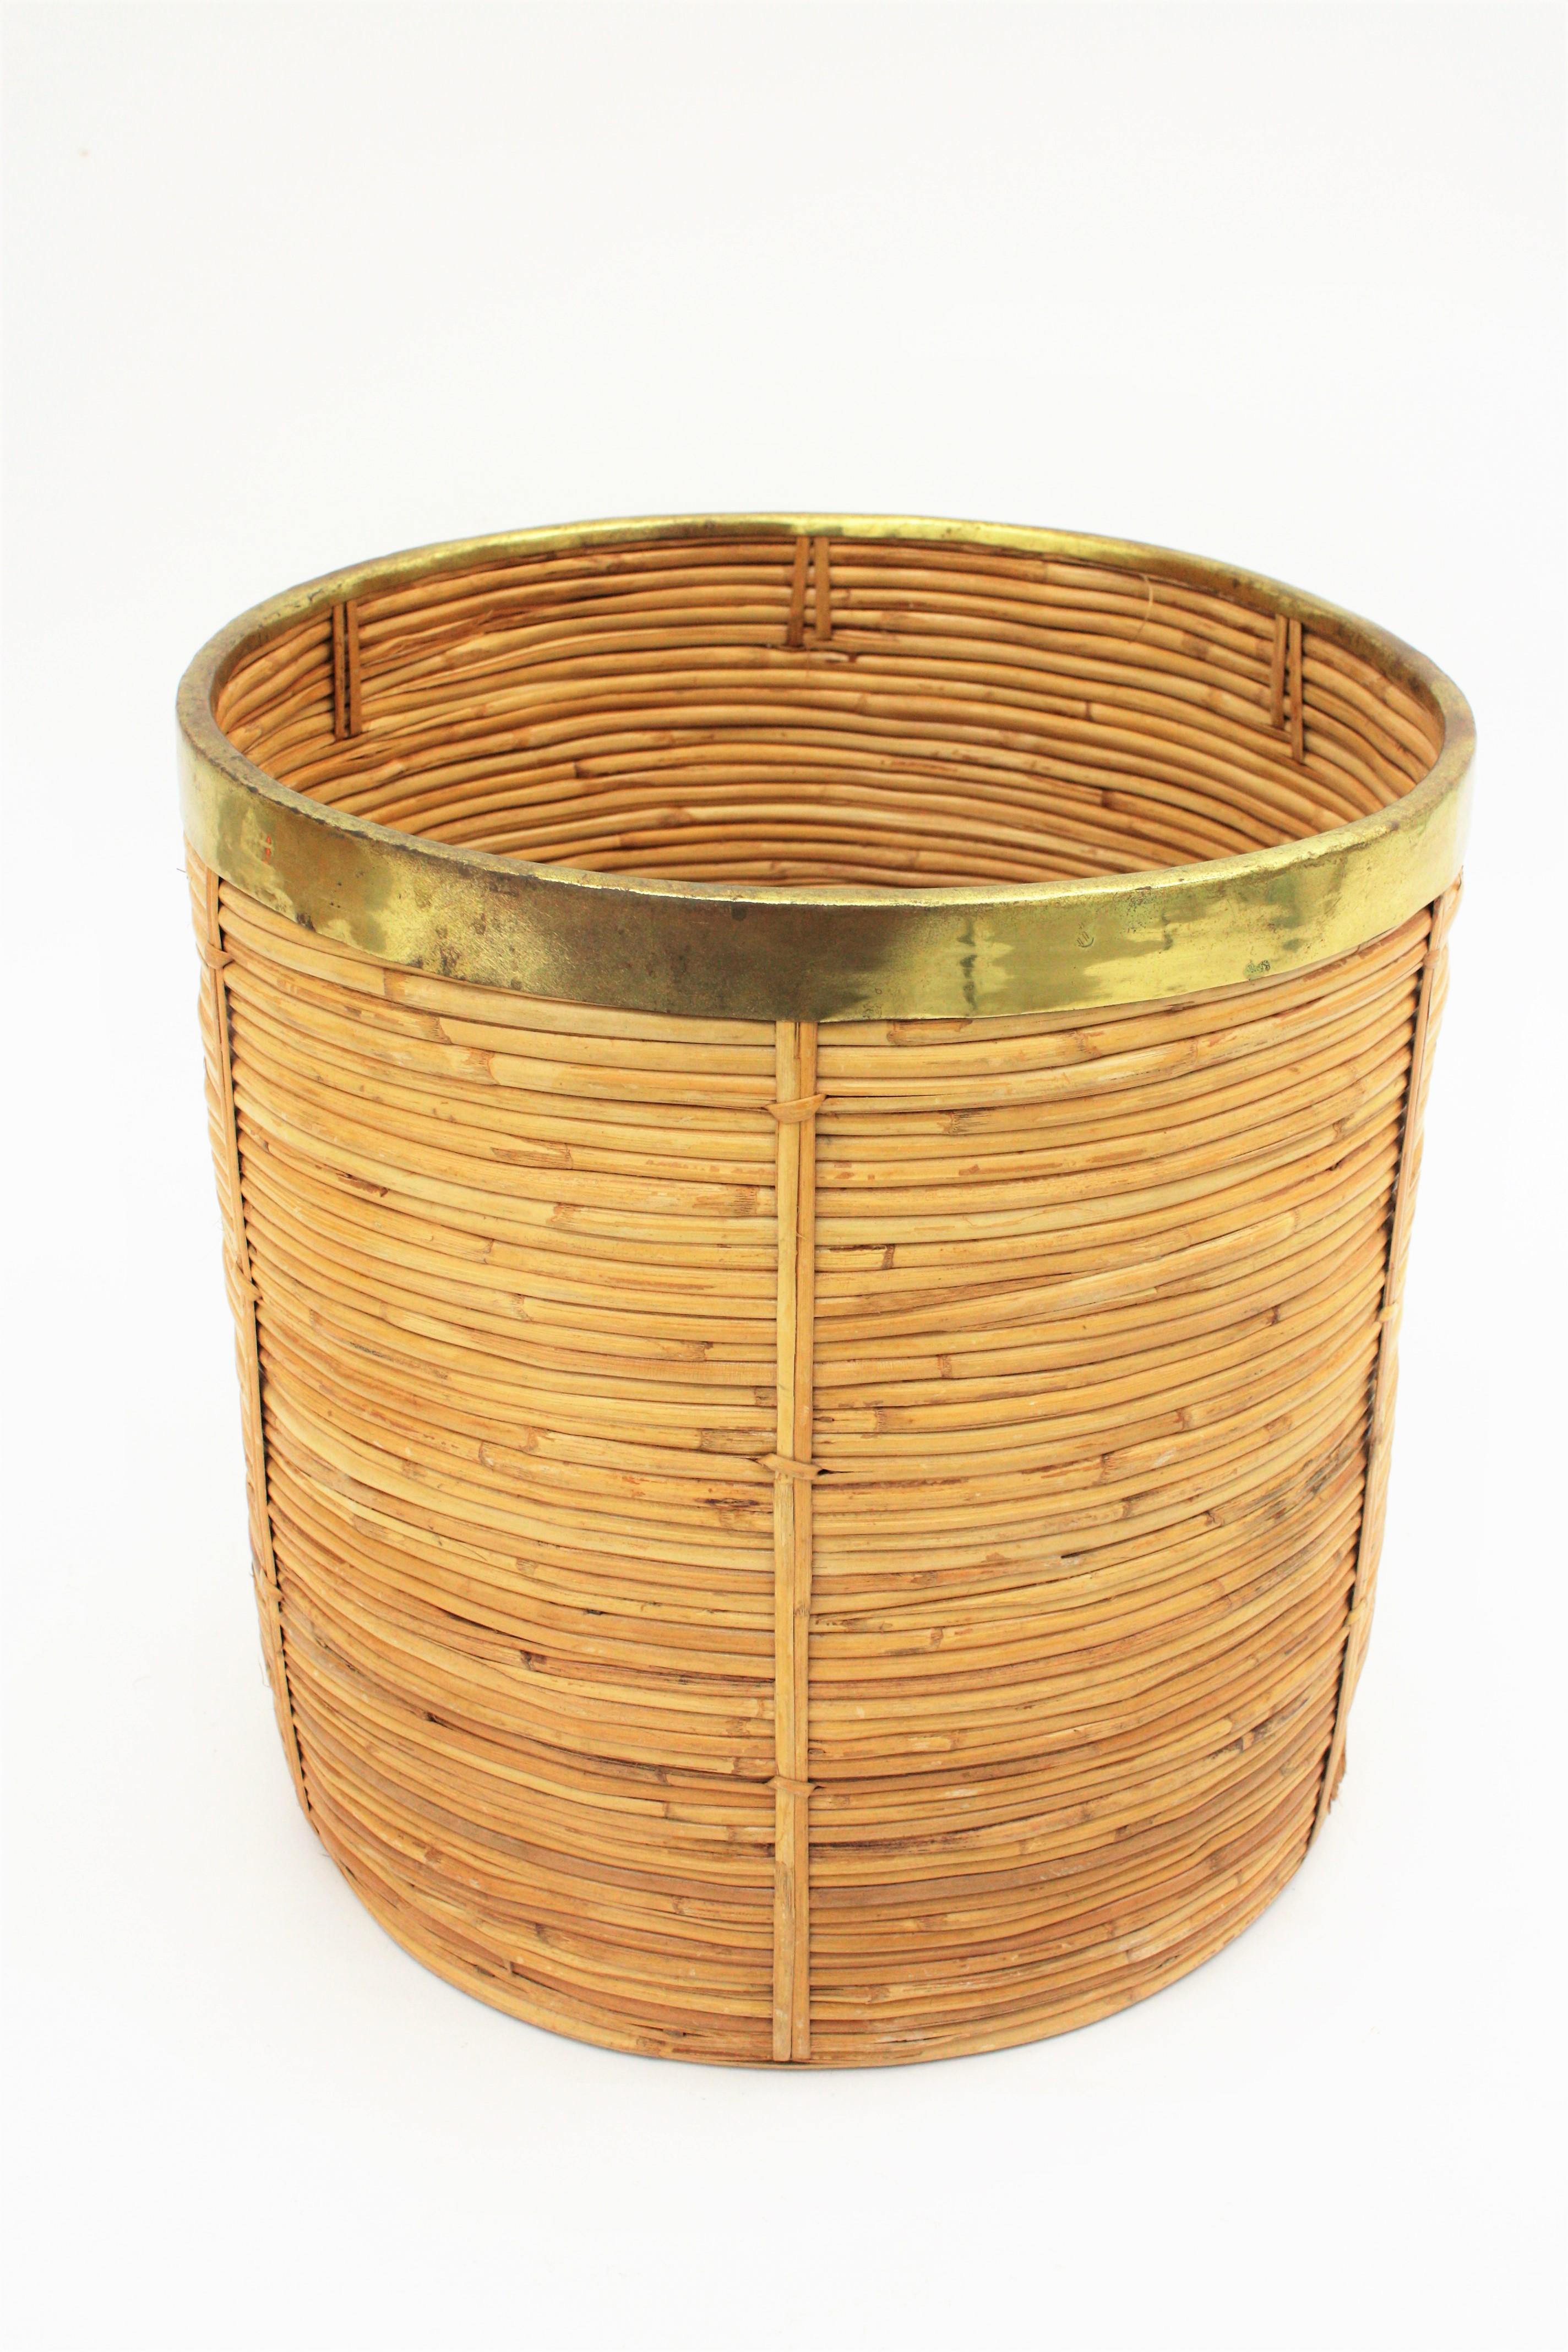 Italian Large Midcentury Gabriella Crespi Style Brass and Rattan Bamboo Round Planter